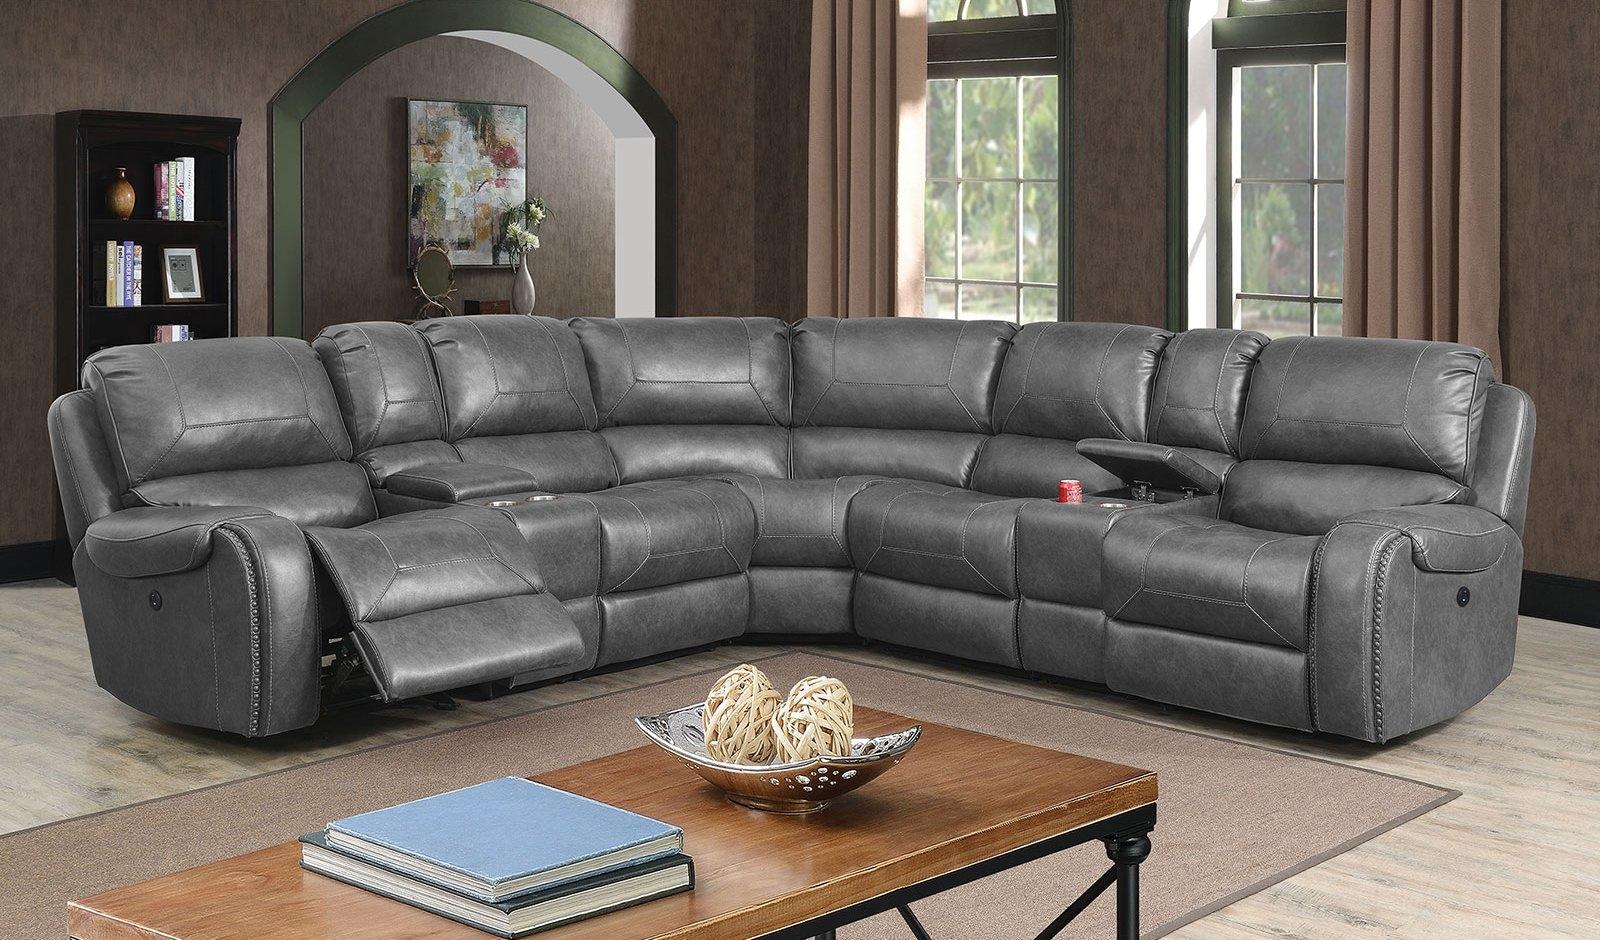 Transitional Recliner Sectional CM6951GY-SECT Joanne CM6951GY-SECT in Gray Leatherette